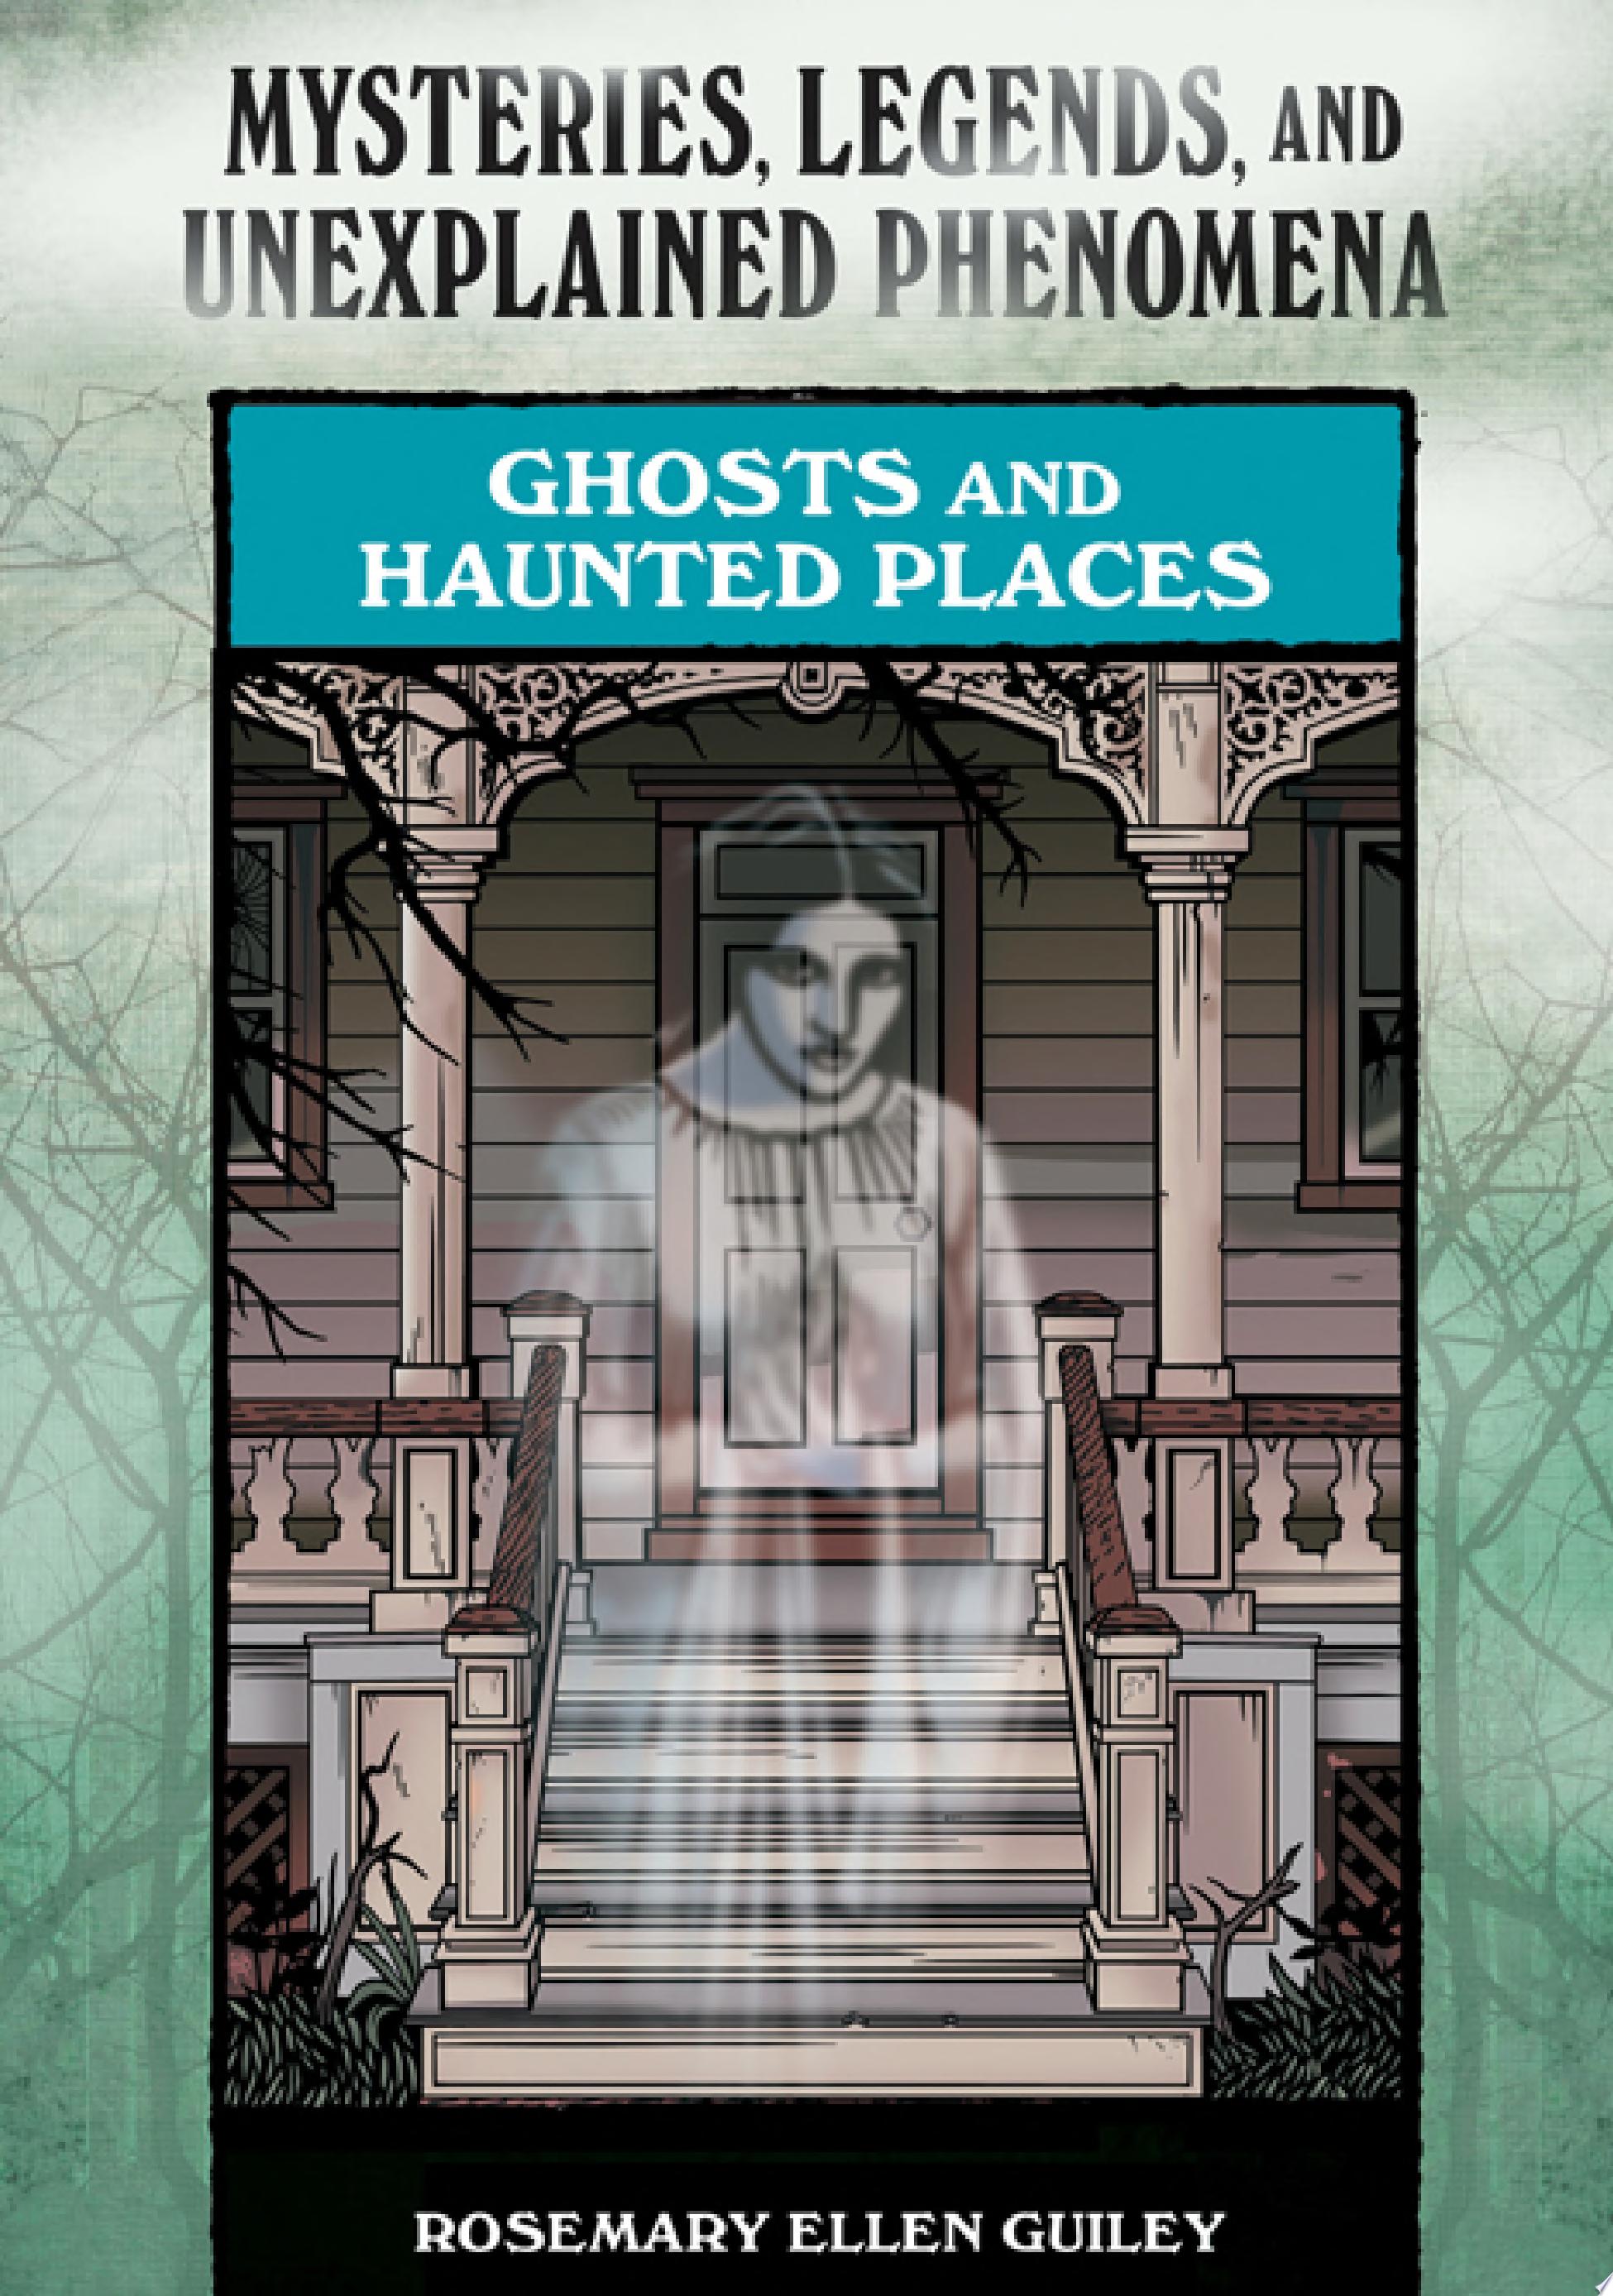 Image for "Ghosts and Haunted Places"